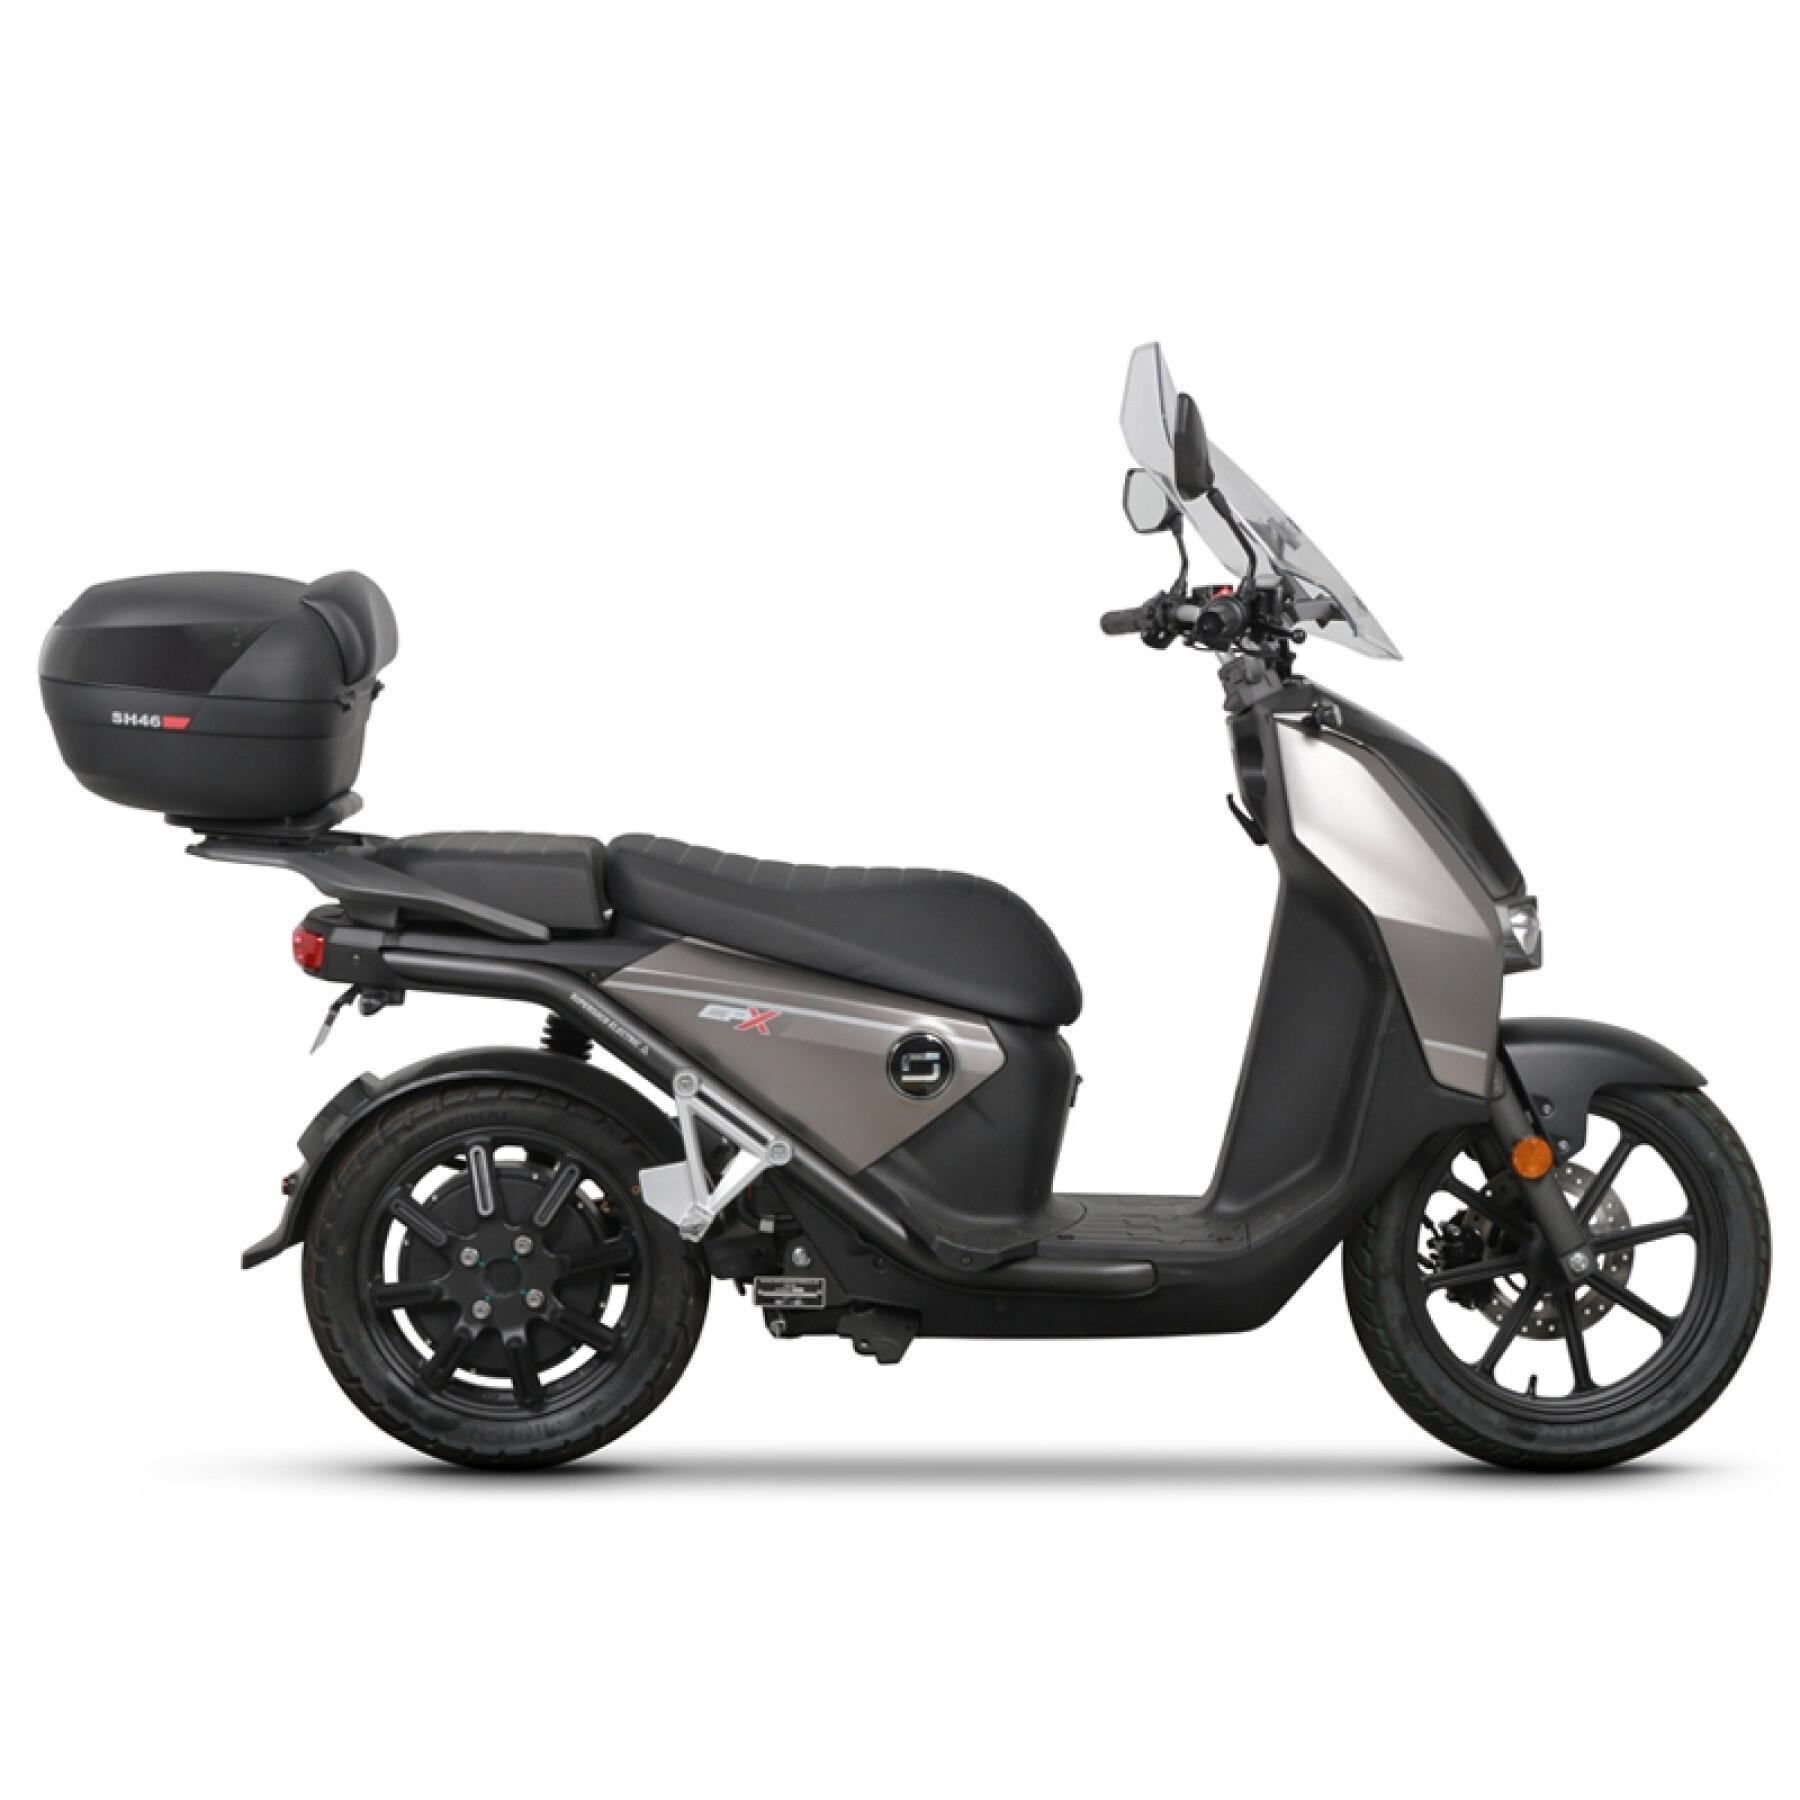 Suporte de Scooter top case Shad Super soco cpx electric 2020-2021 - Support top case Shad